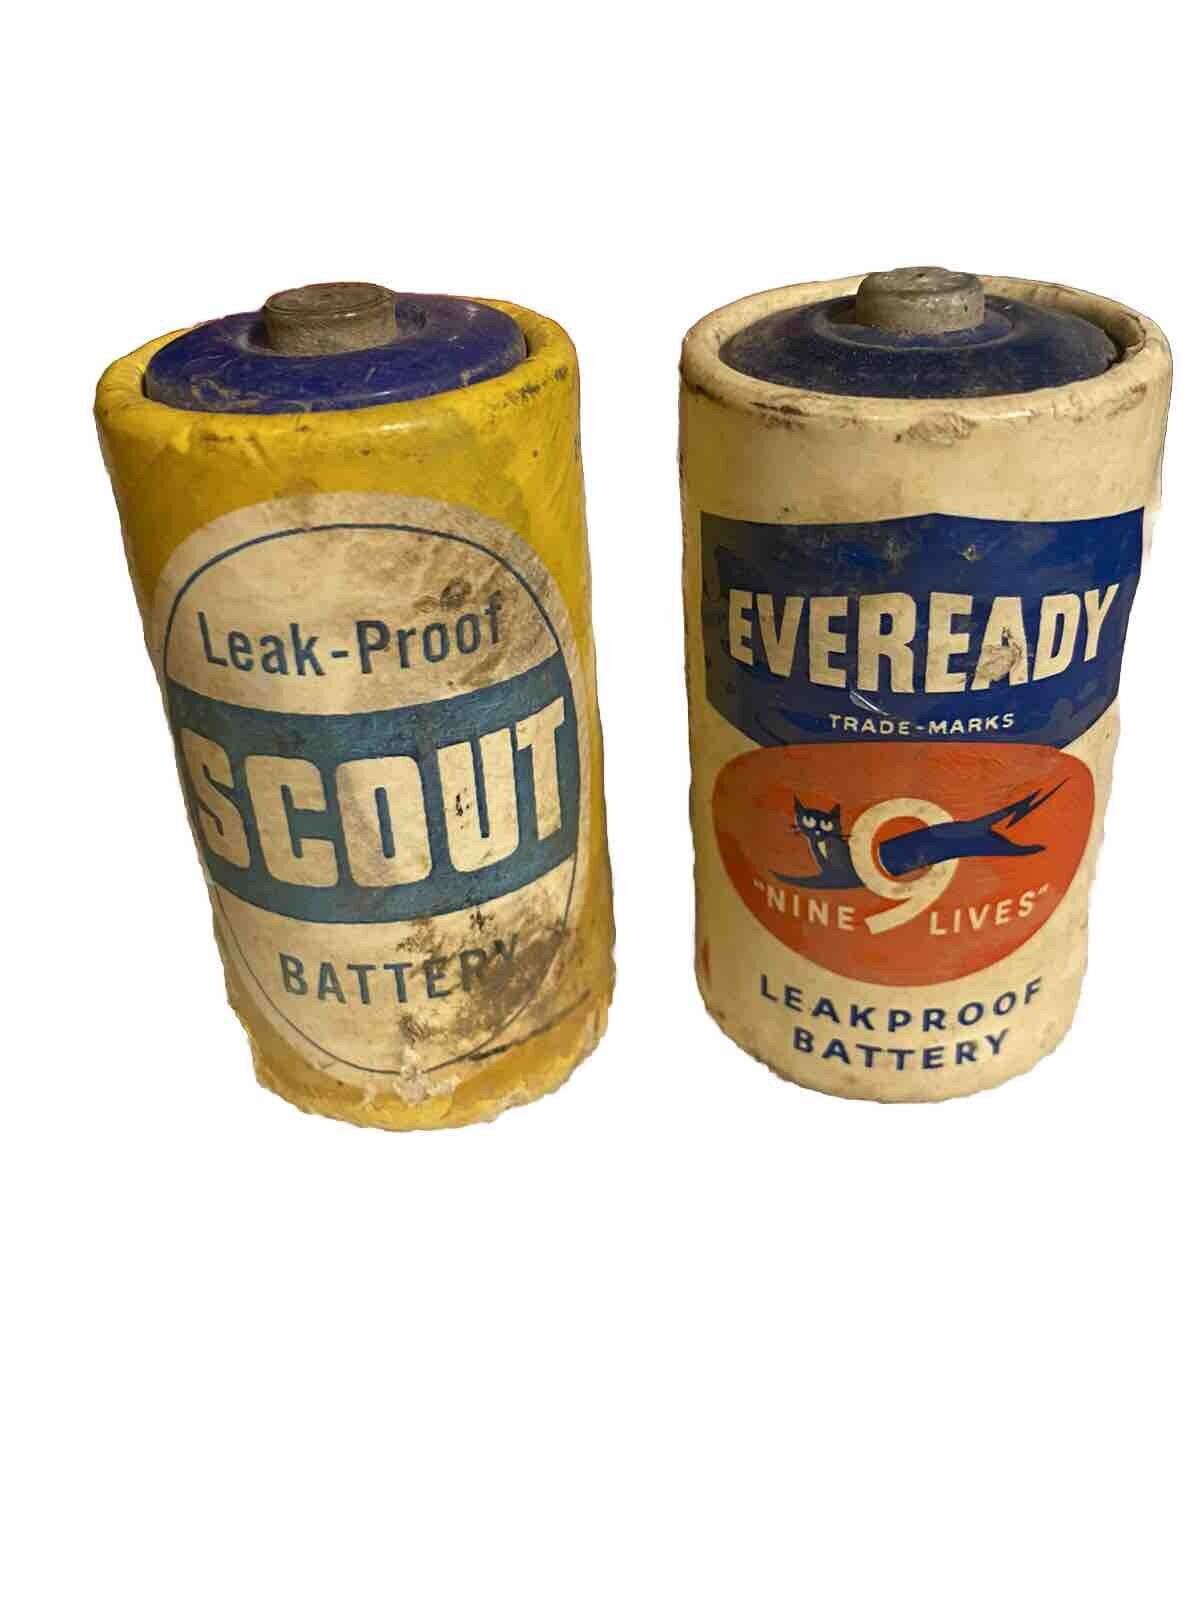 2 Vintage D Cell Leakproof Flashlight Batteries Eveready #950 Scout  Made In USA